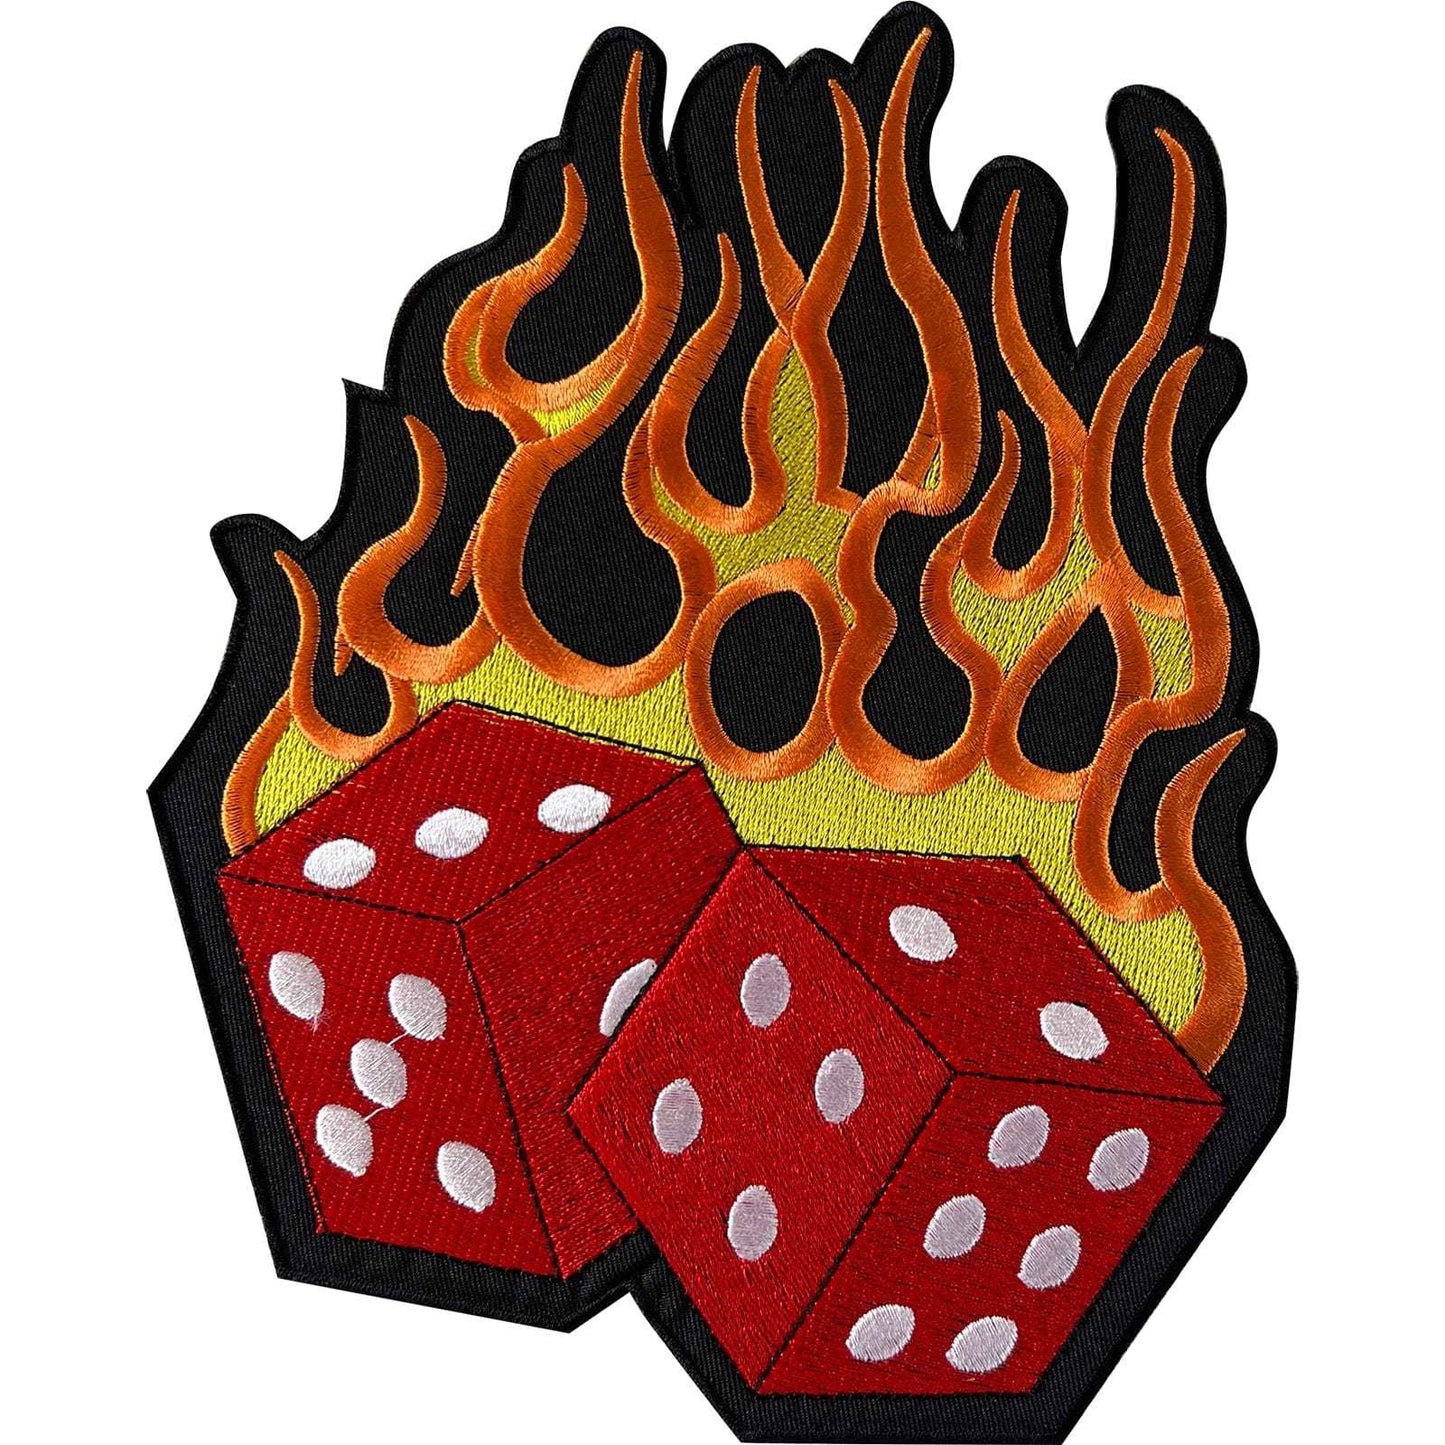 Big Large Flaming Dice Iron Sew On Jacket Patch Fire Flames Embroidered Badge